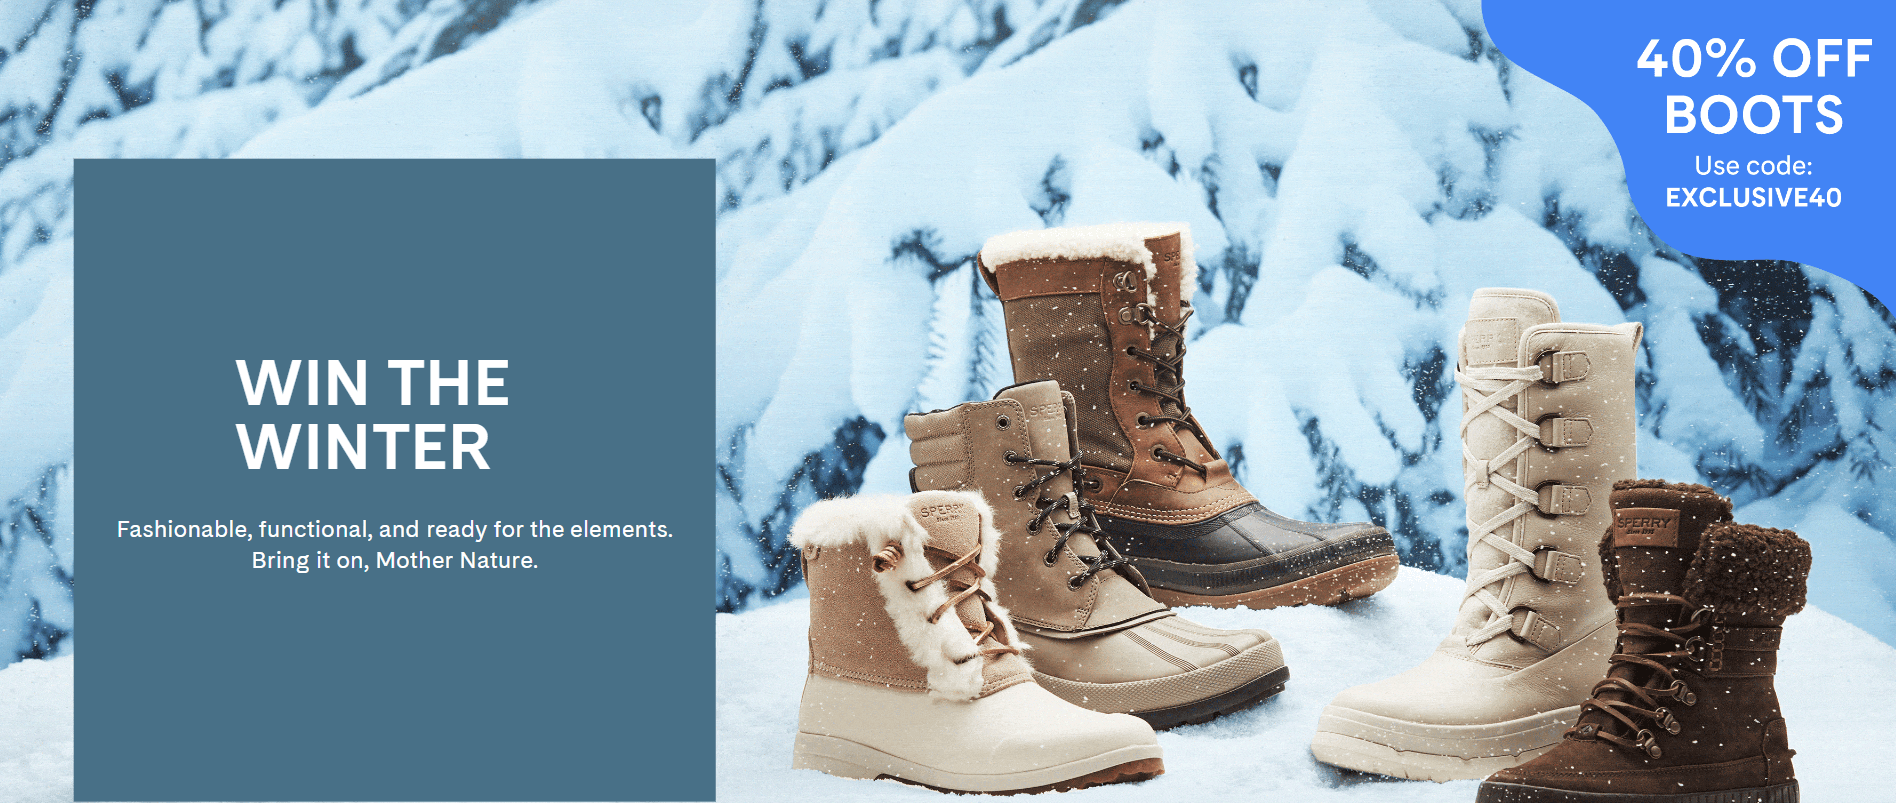 Sperry Winter Boots Offers